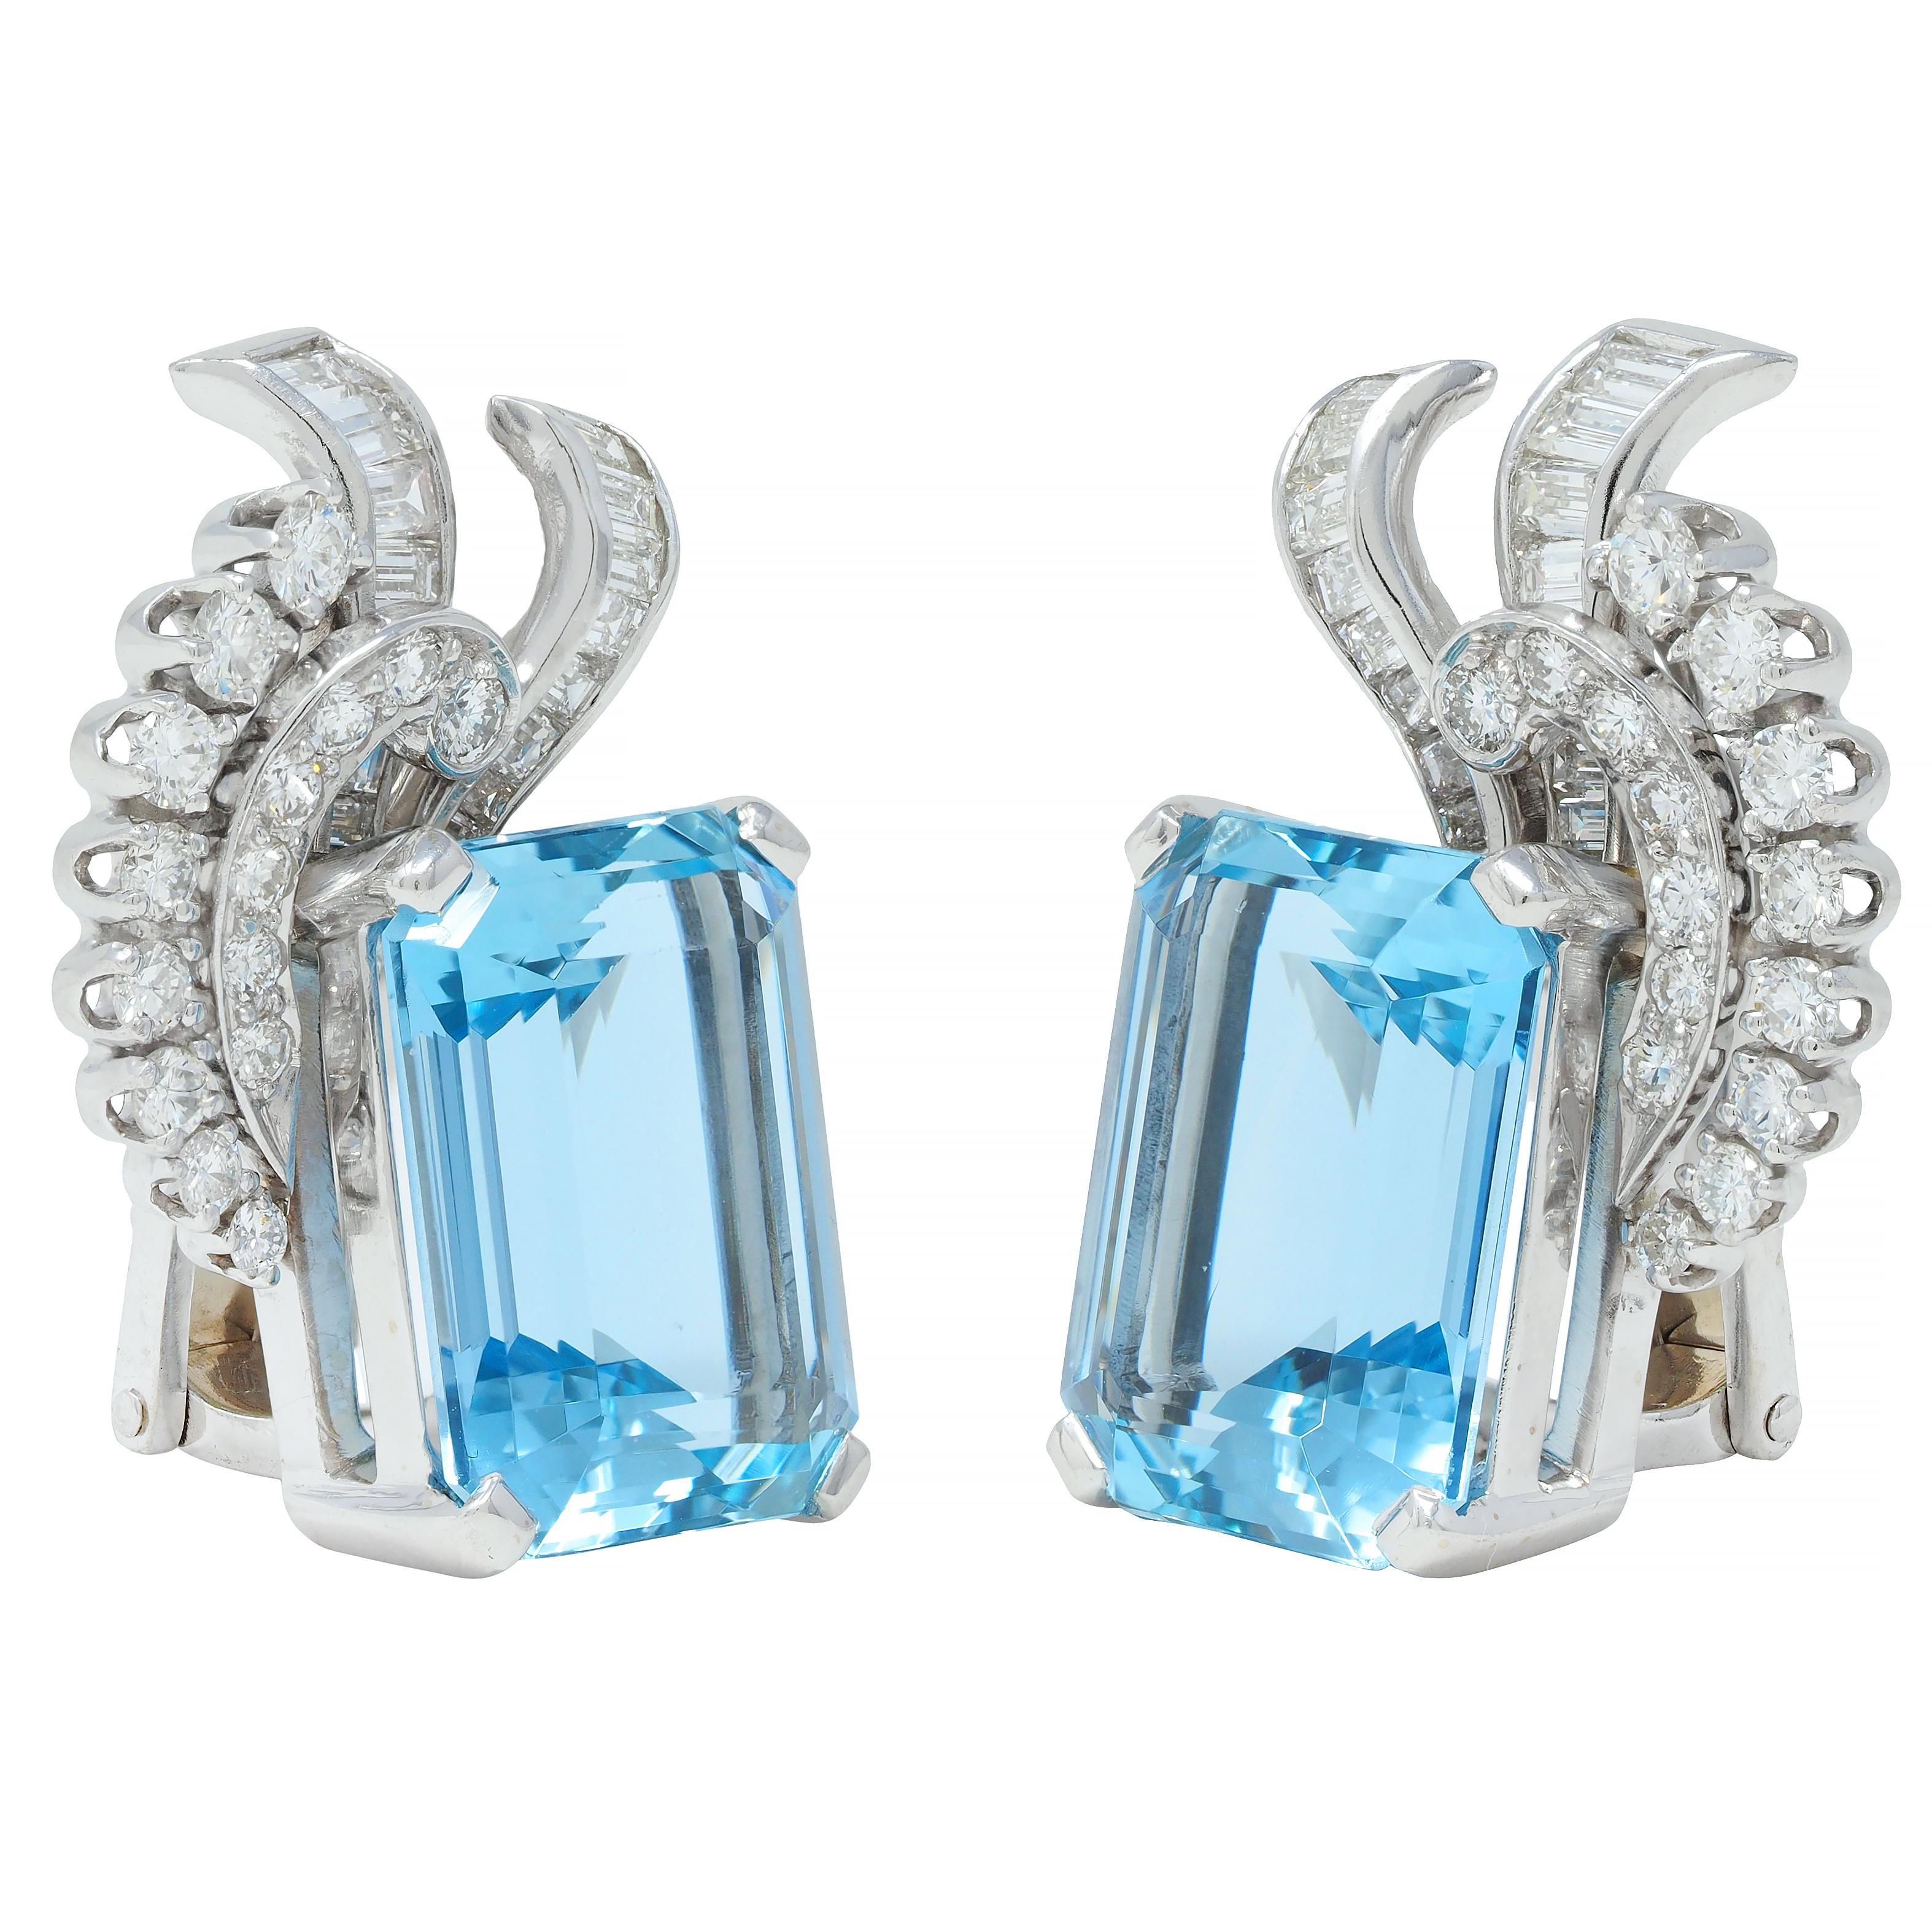 Featuring emerald-cut aquamarines weighing approximately 17.20 carats total 
Transparent light blue in color and prong set in a white gold baskets
Juxtaposed by scrolling rows of round brilliant and baguette cut diamonds
Weighing approximately 1.24